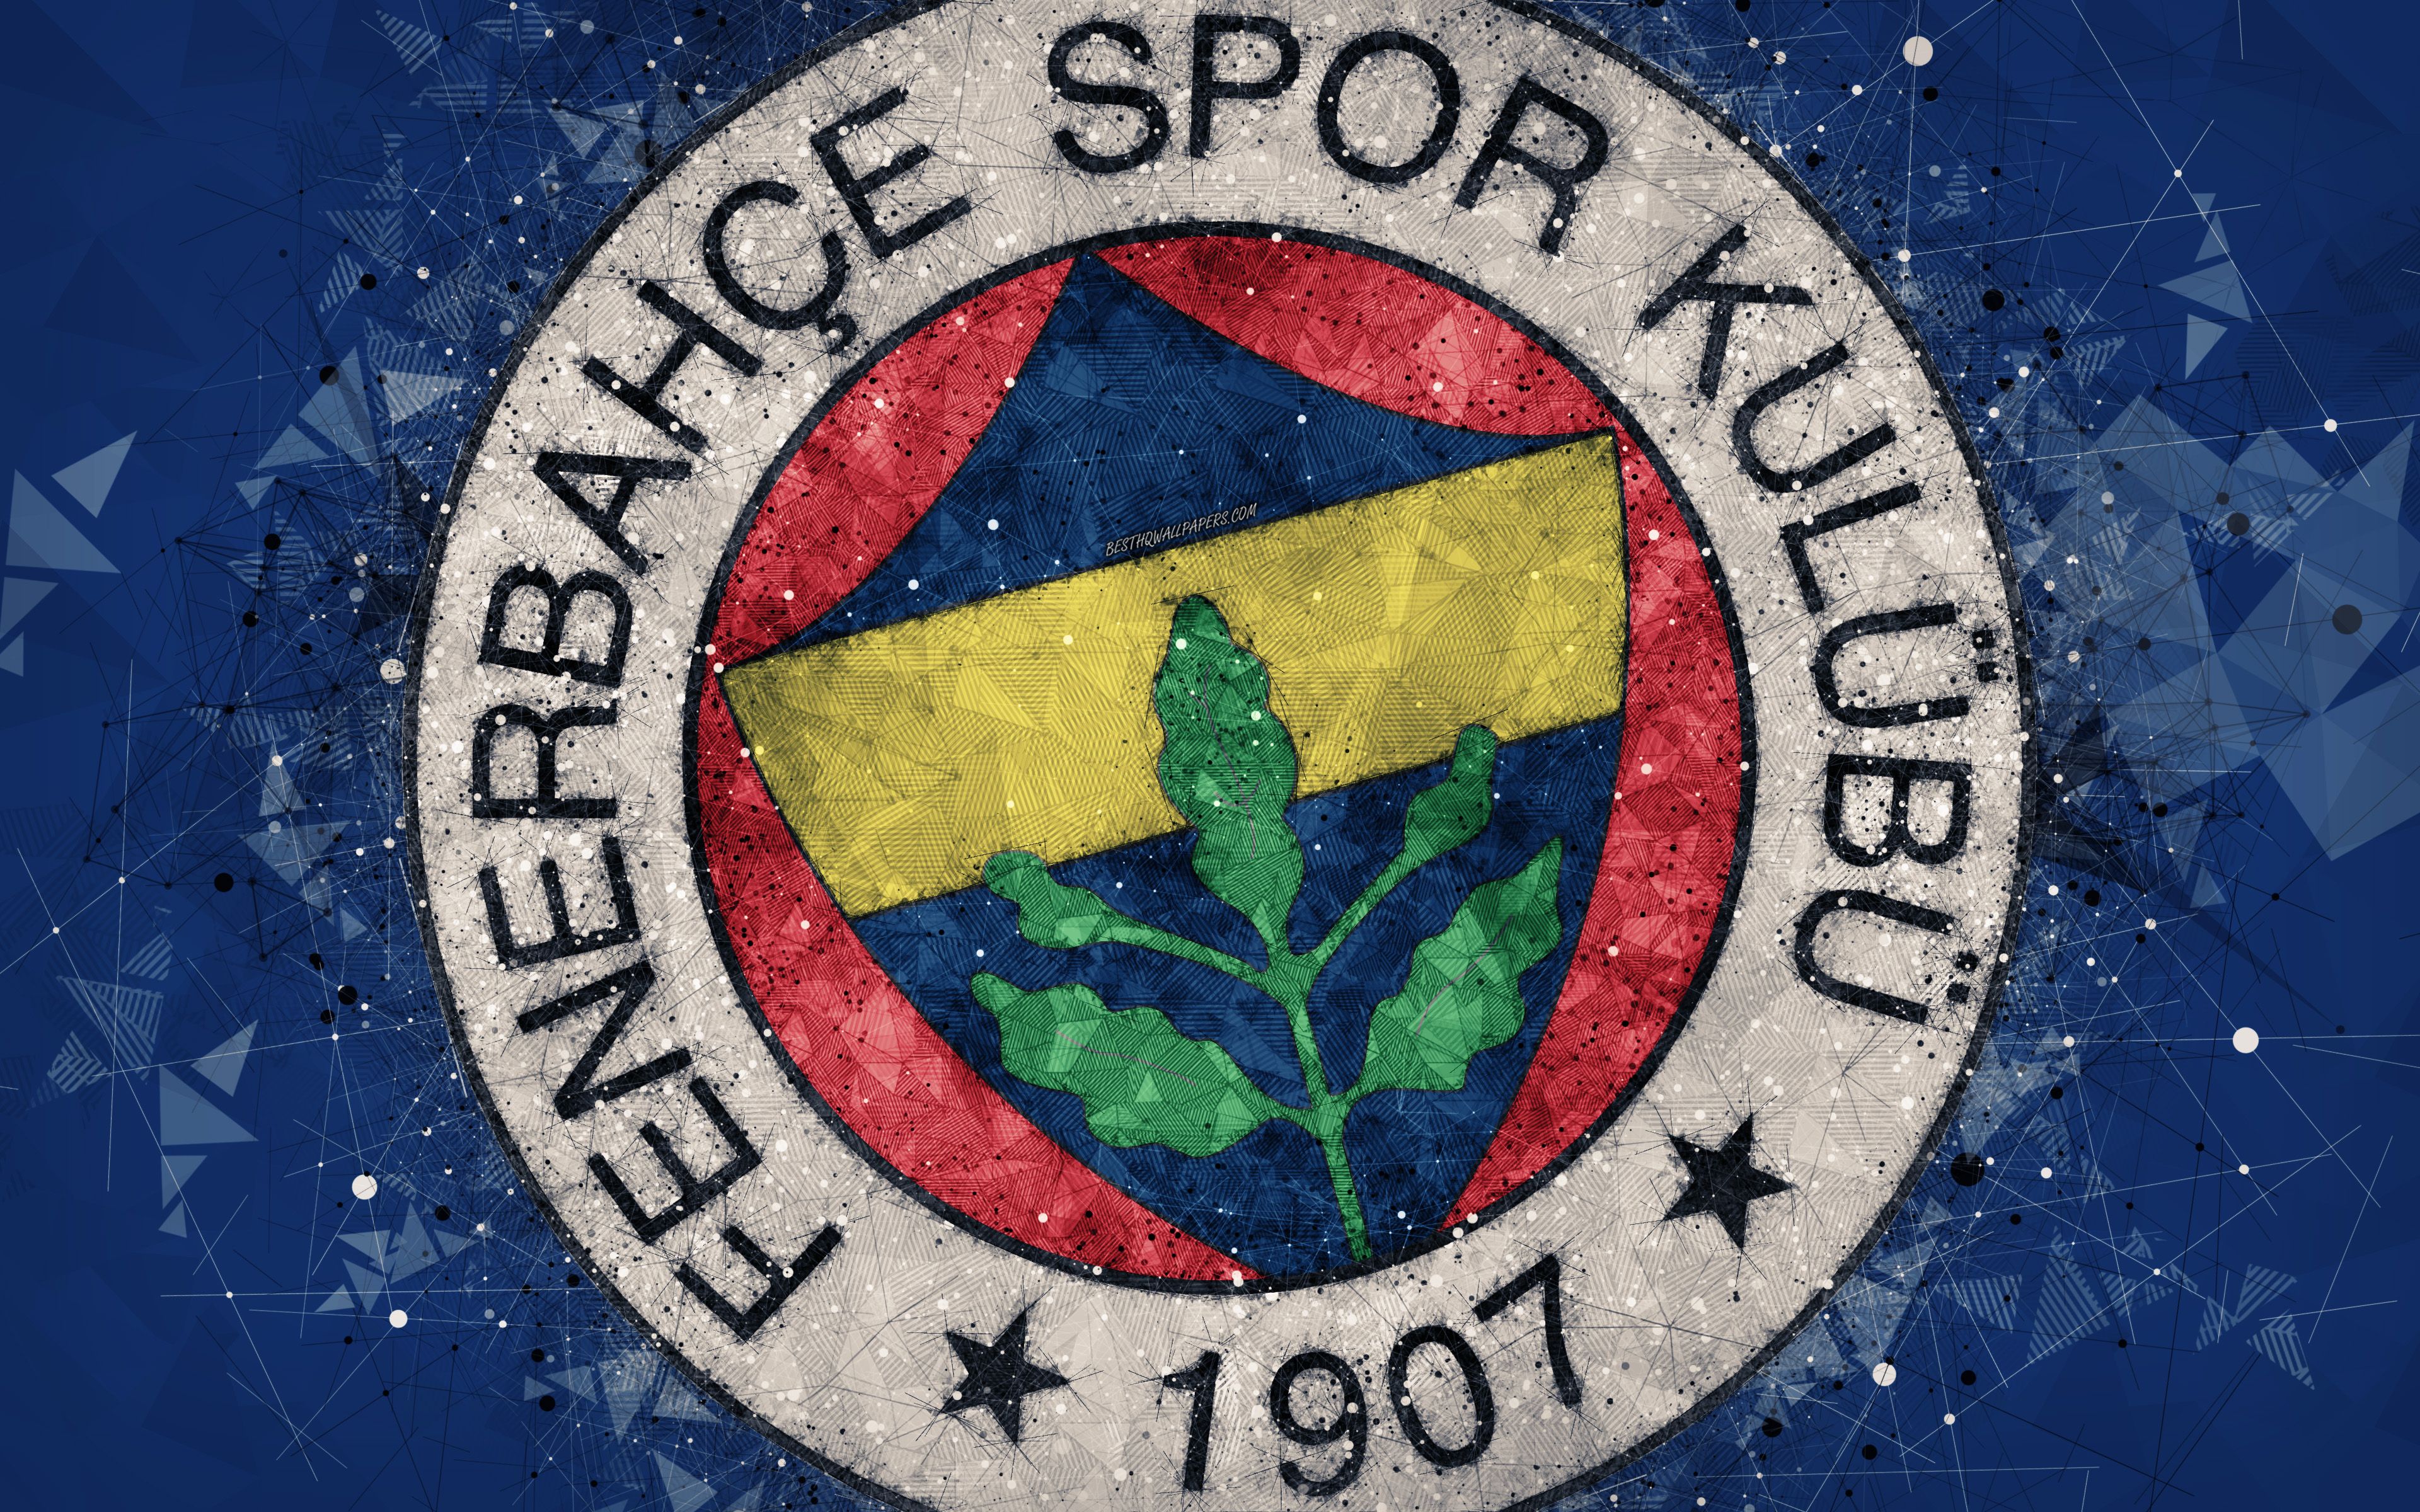 Download wallpaper Fenerbahce SK, 4k, logo, creative art, Turkish football club, geometric art, grunge style, blue abstract background, Istanbul, Turkey, Super Lig, football, Fenerbahce FC for desktop with resolution 3840x2400. High Quality